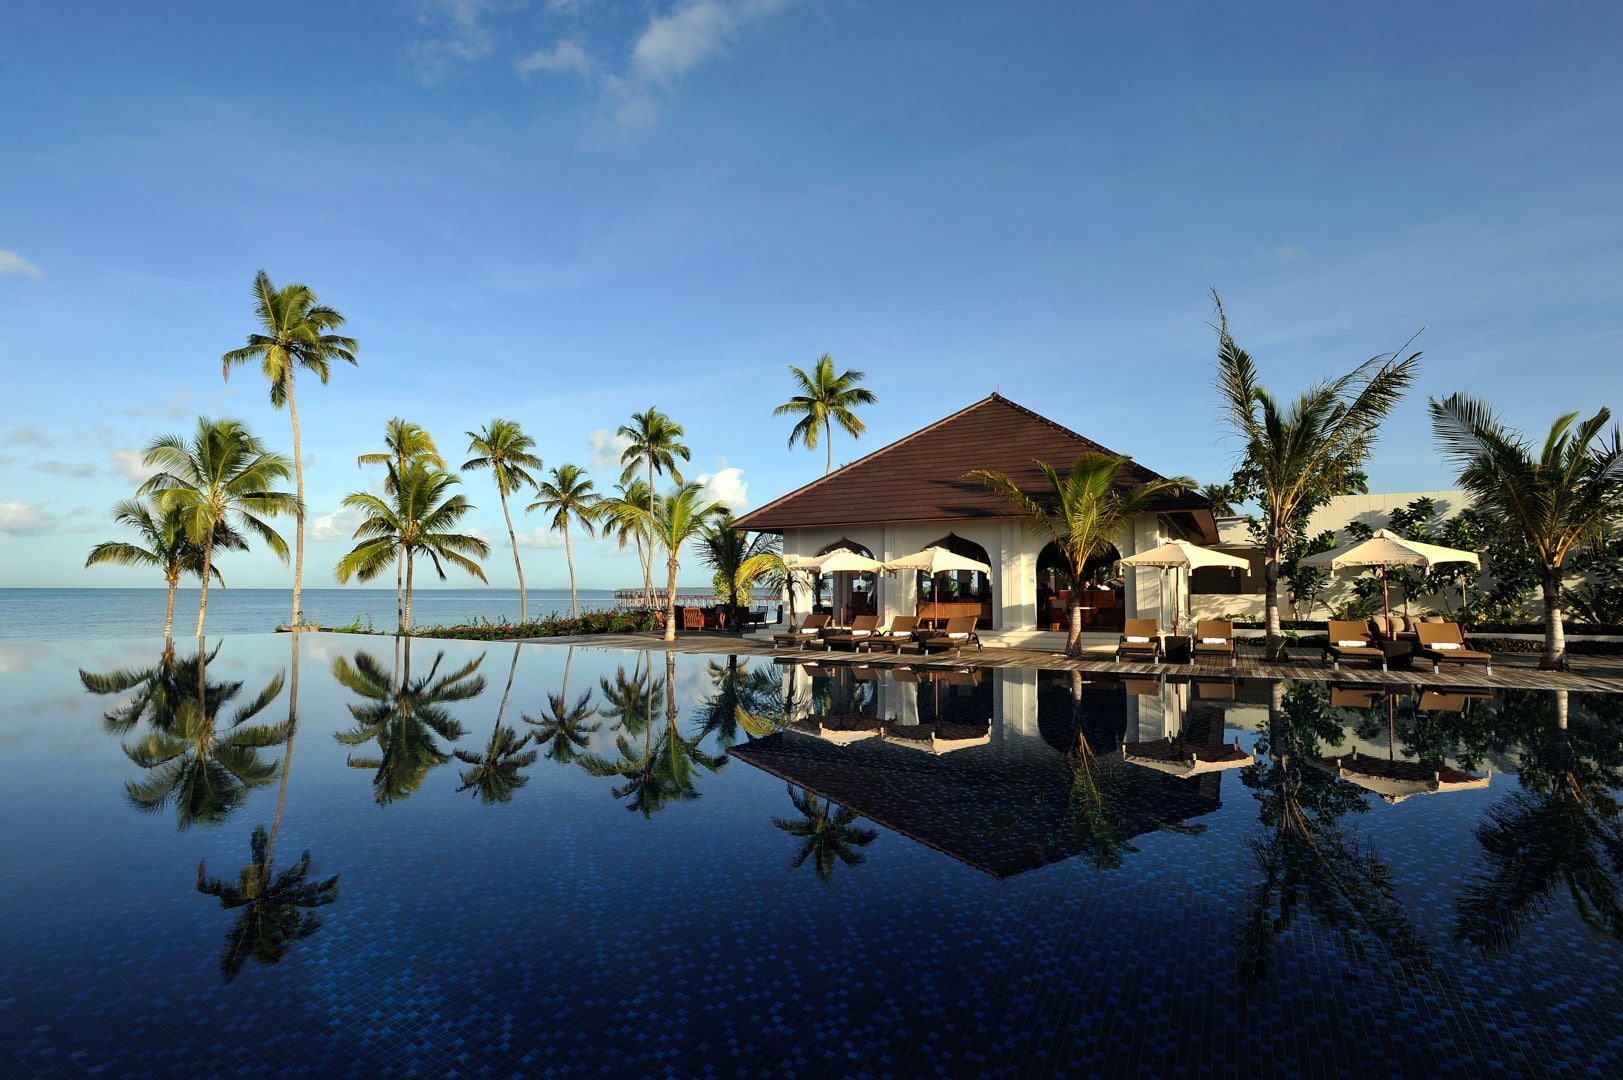 The swimming pool at The Residence Zanzibar – one of the top rated Zanzibar resorts with Kids Clubs.